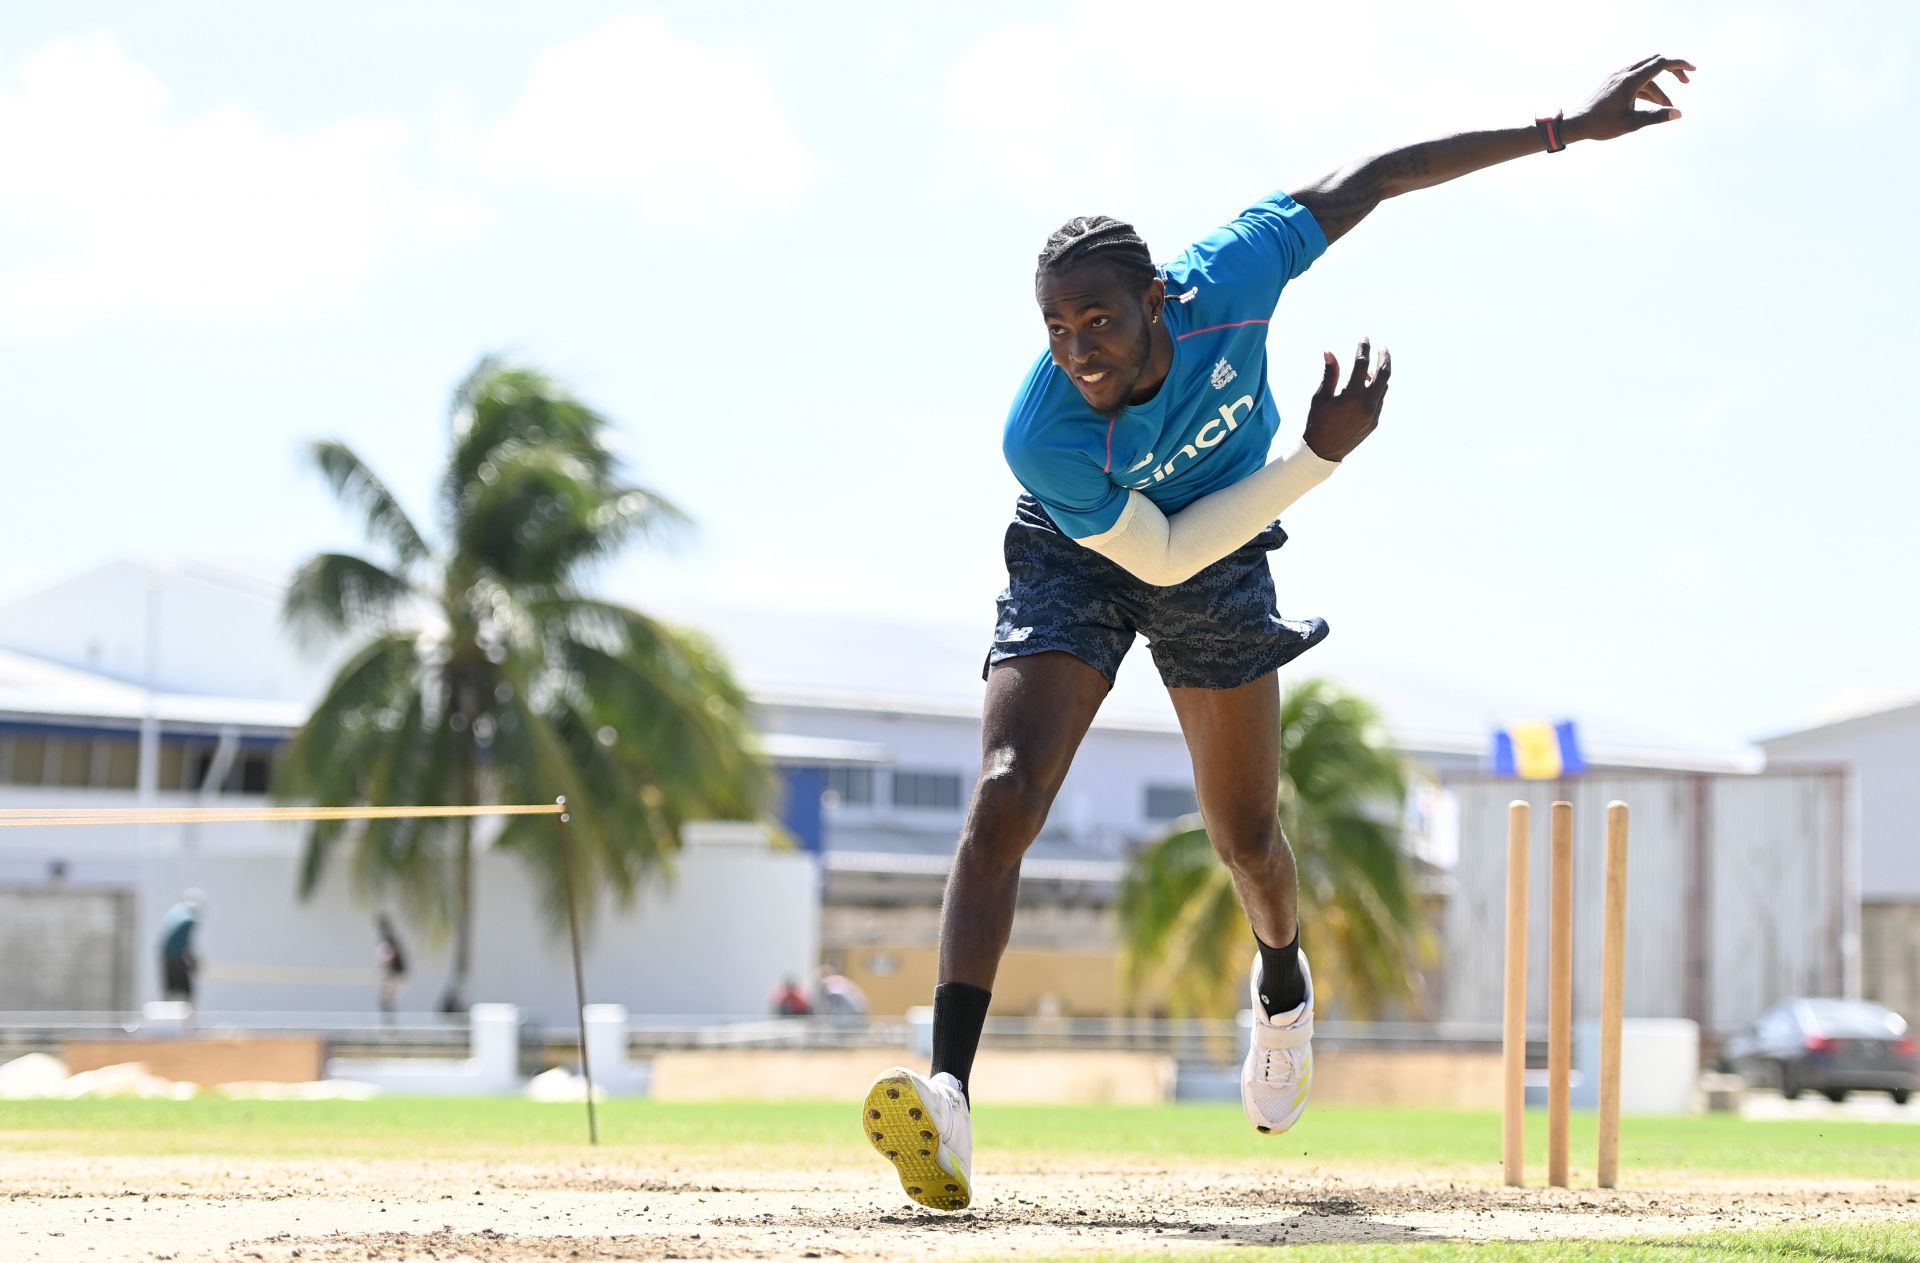 England fast bowler Jofra Archer (Image credits: Getty Images)